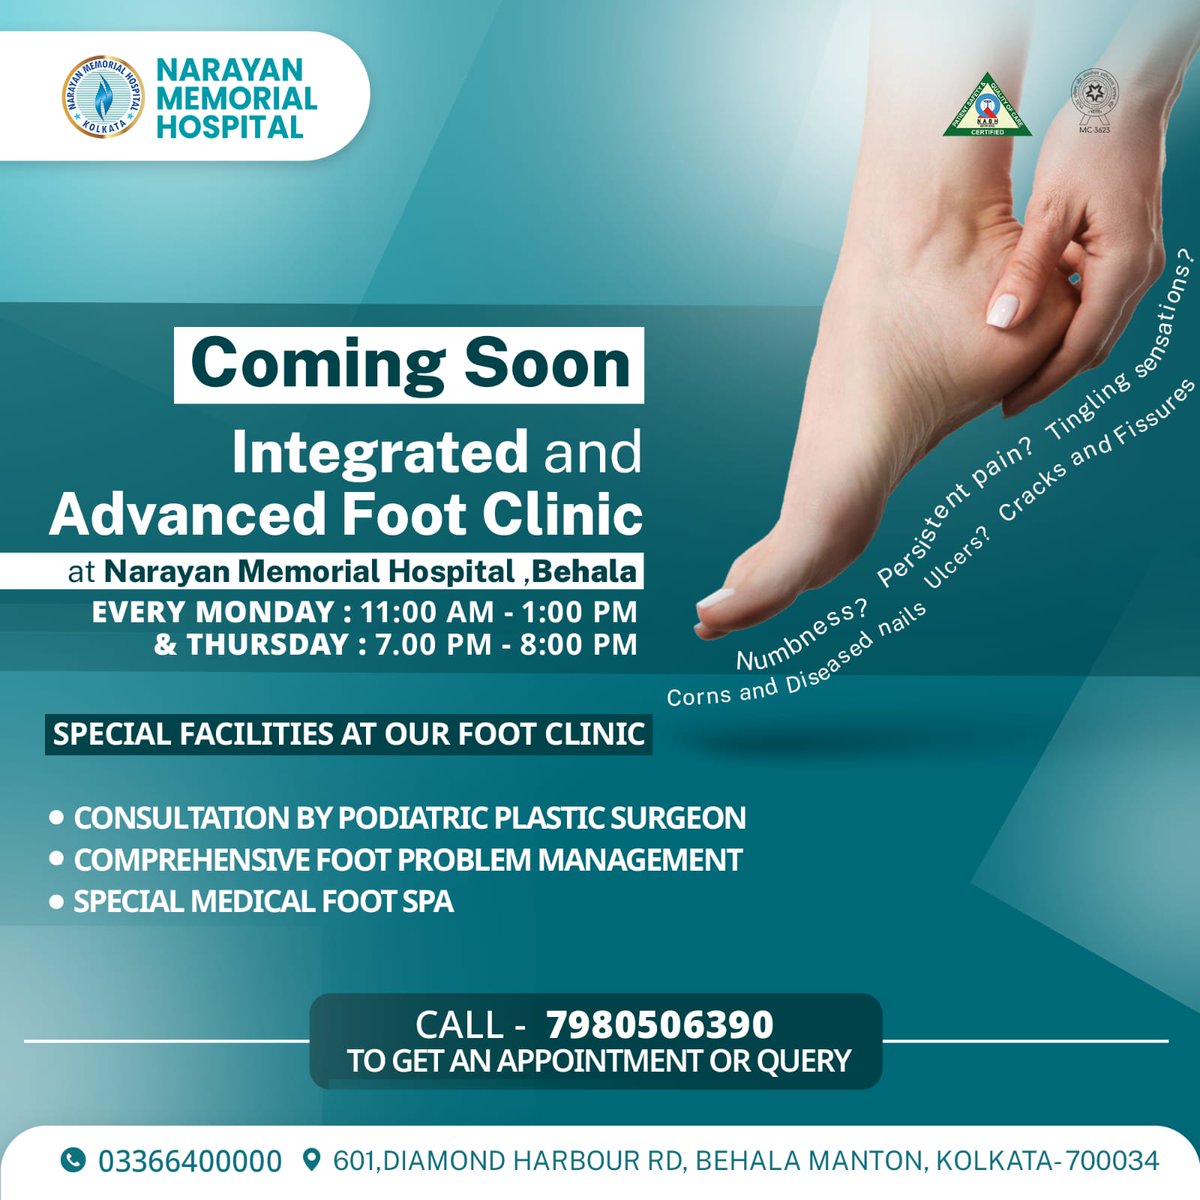 Set your foot to conquer your dreams bidding bye-bye to the pain
Integrated and Advanced Foot Clinic
At Narayan Memorial Hospital, Behala
Every Monday: 11 am-1 pm
and Thursday:  7 pm-8 pm
.
.
.
#footclinic #comingsoon #footcare #NMH